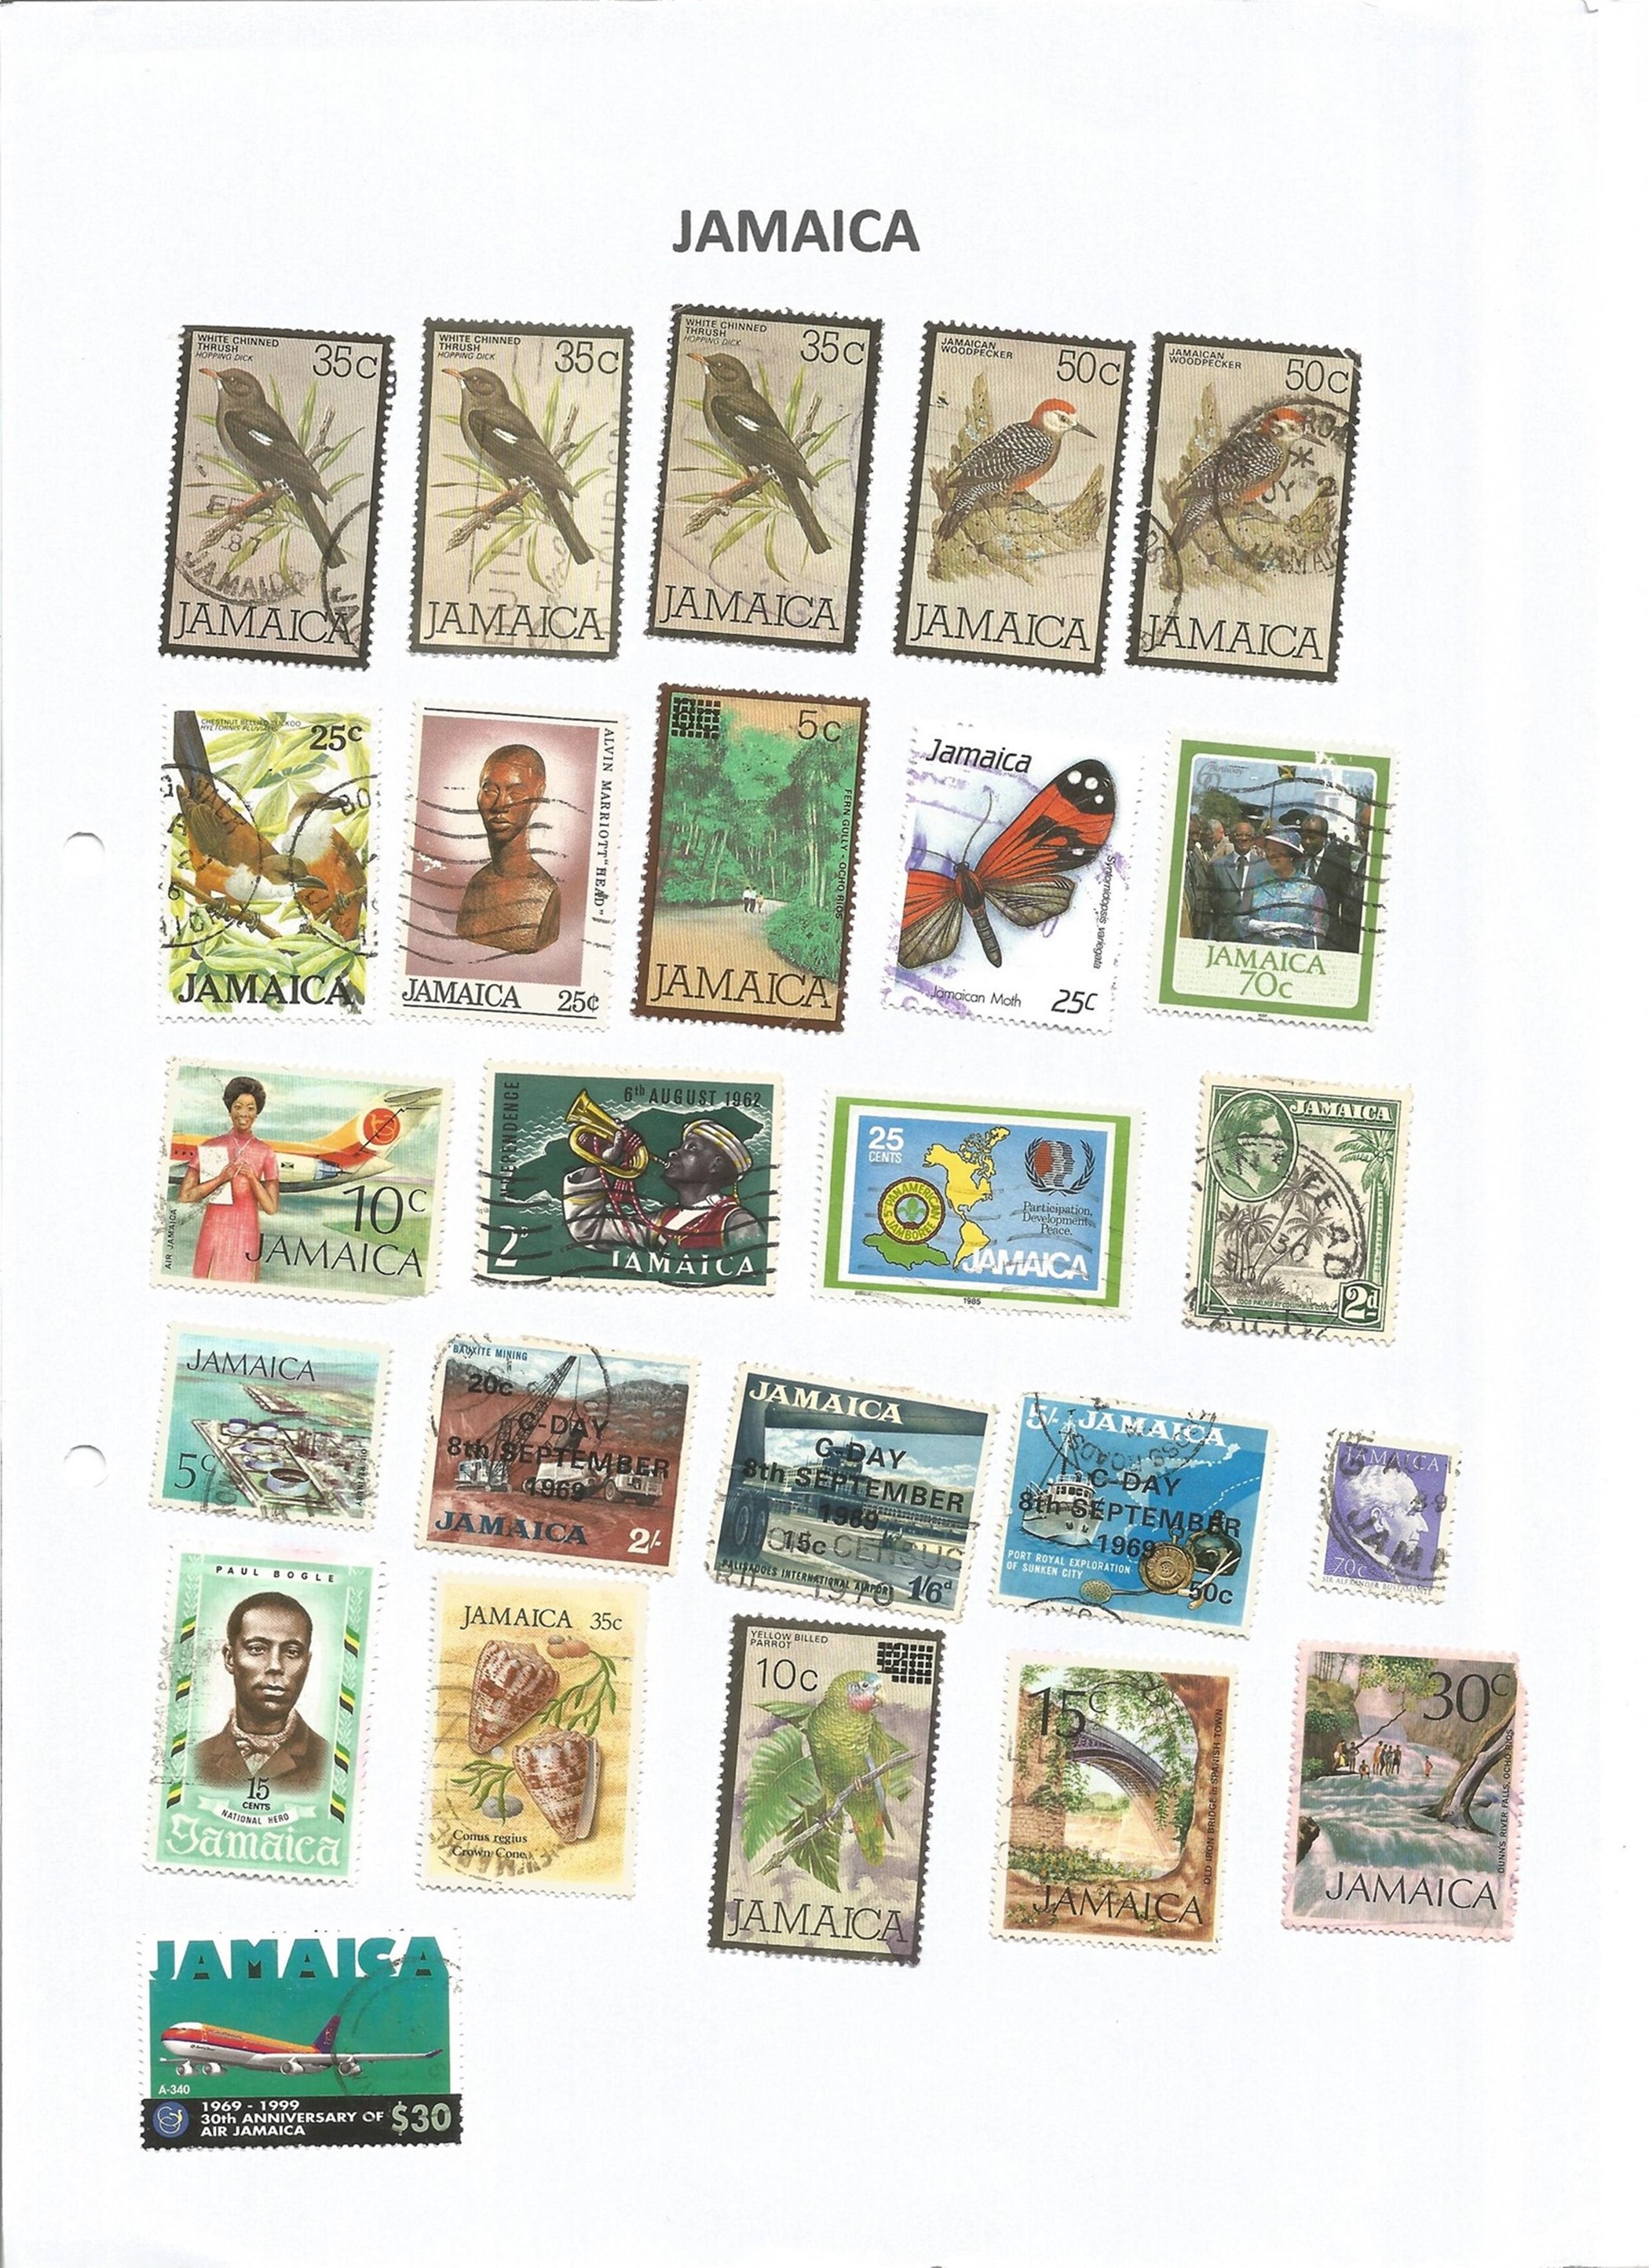 Worldwide Stamps used on 42 Album pages, Countries Include Great Britain, British Colonies & - Image 2 of 4